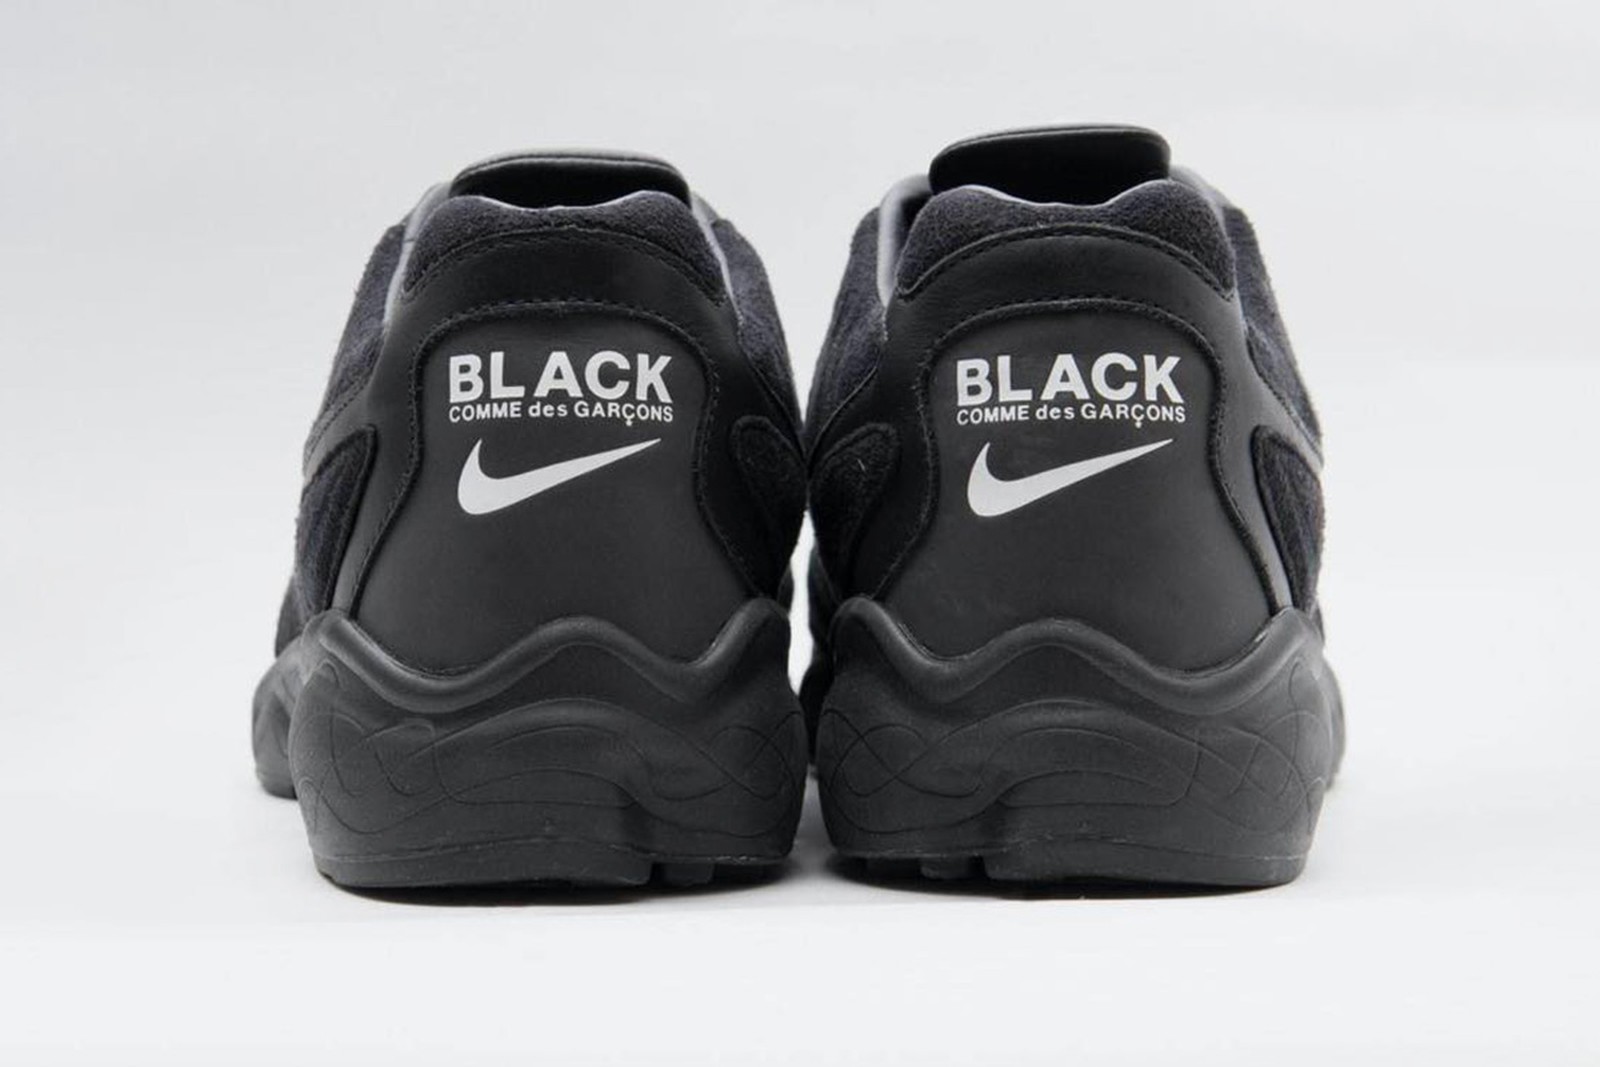 COMME des GARCONS BLACK x Nike Air Zoom Talaria Releasing in 2021